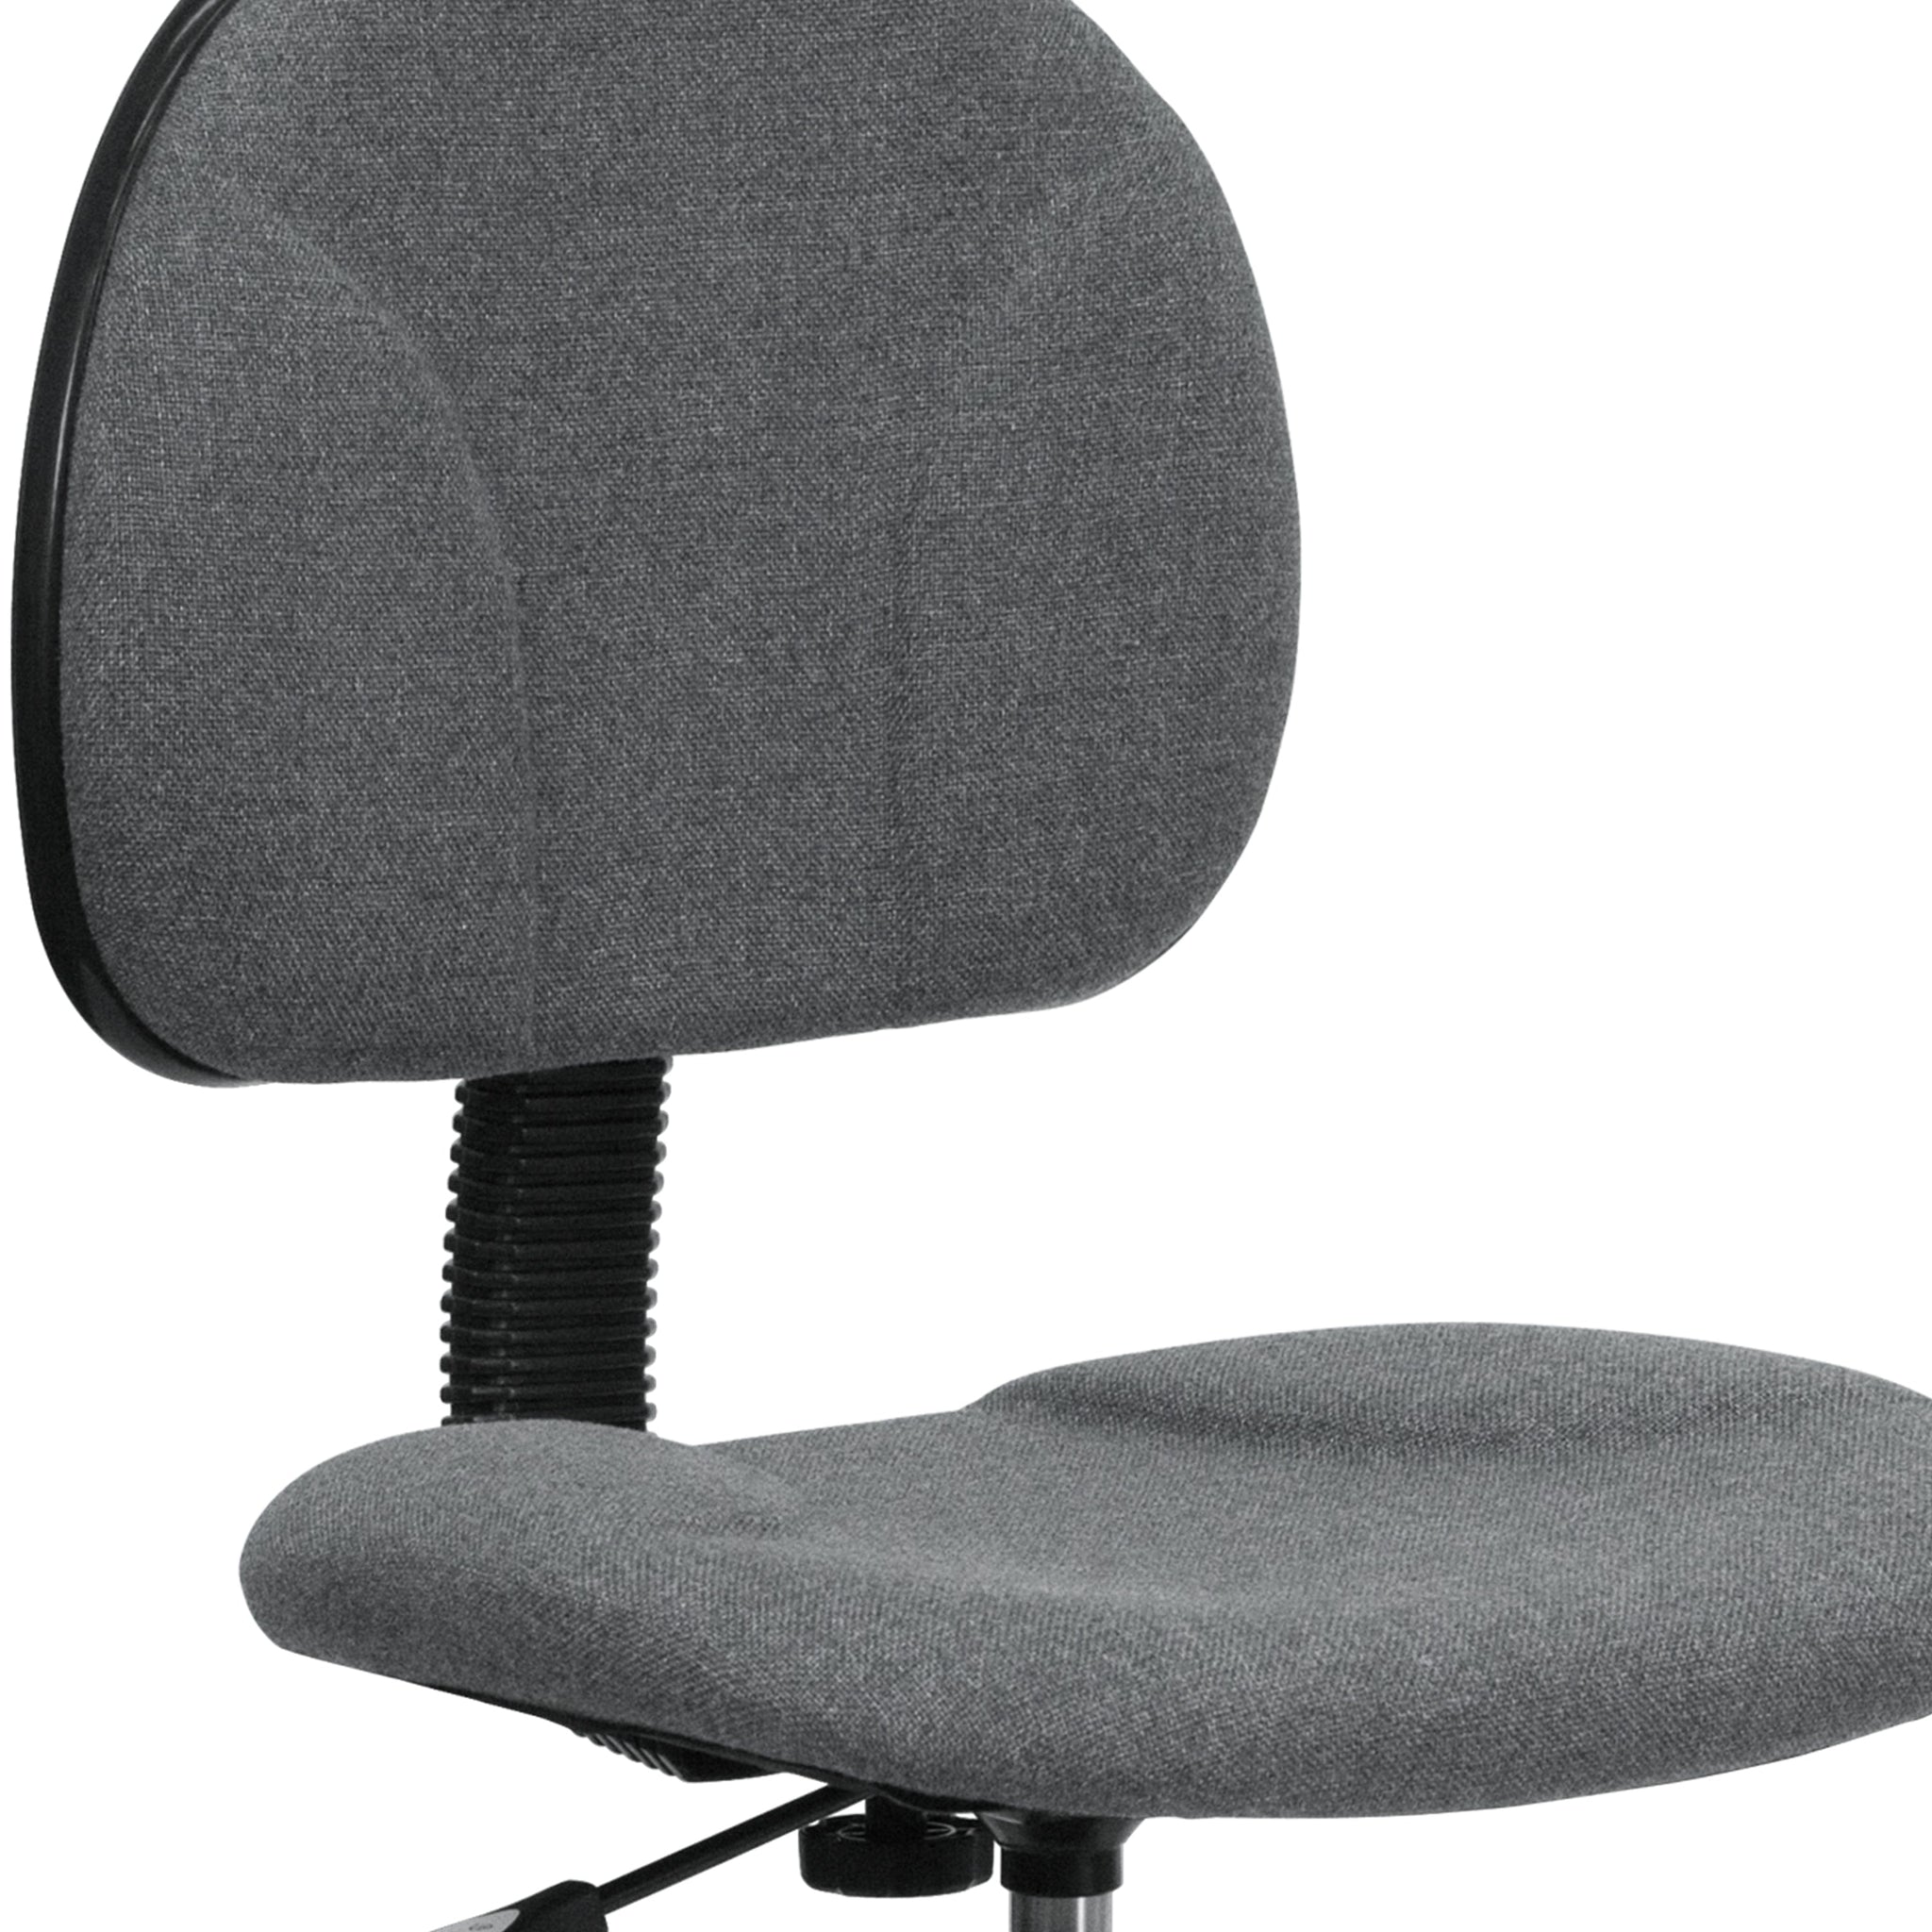 Black Patterned Fabric Drafting Chair - BT-659-BLK-GG